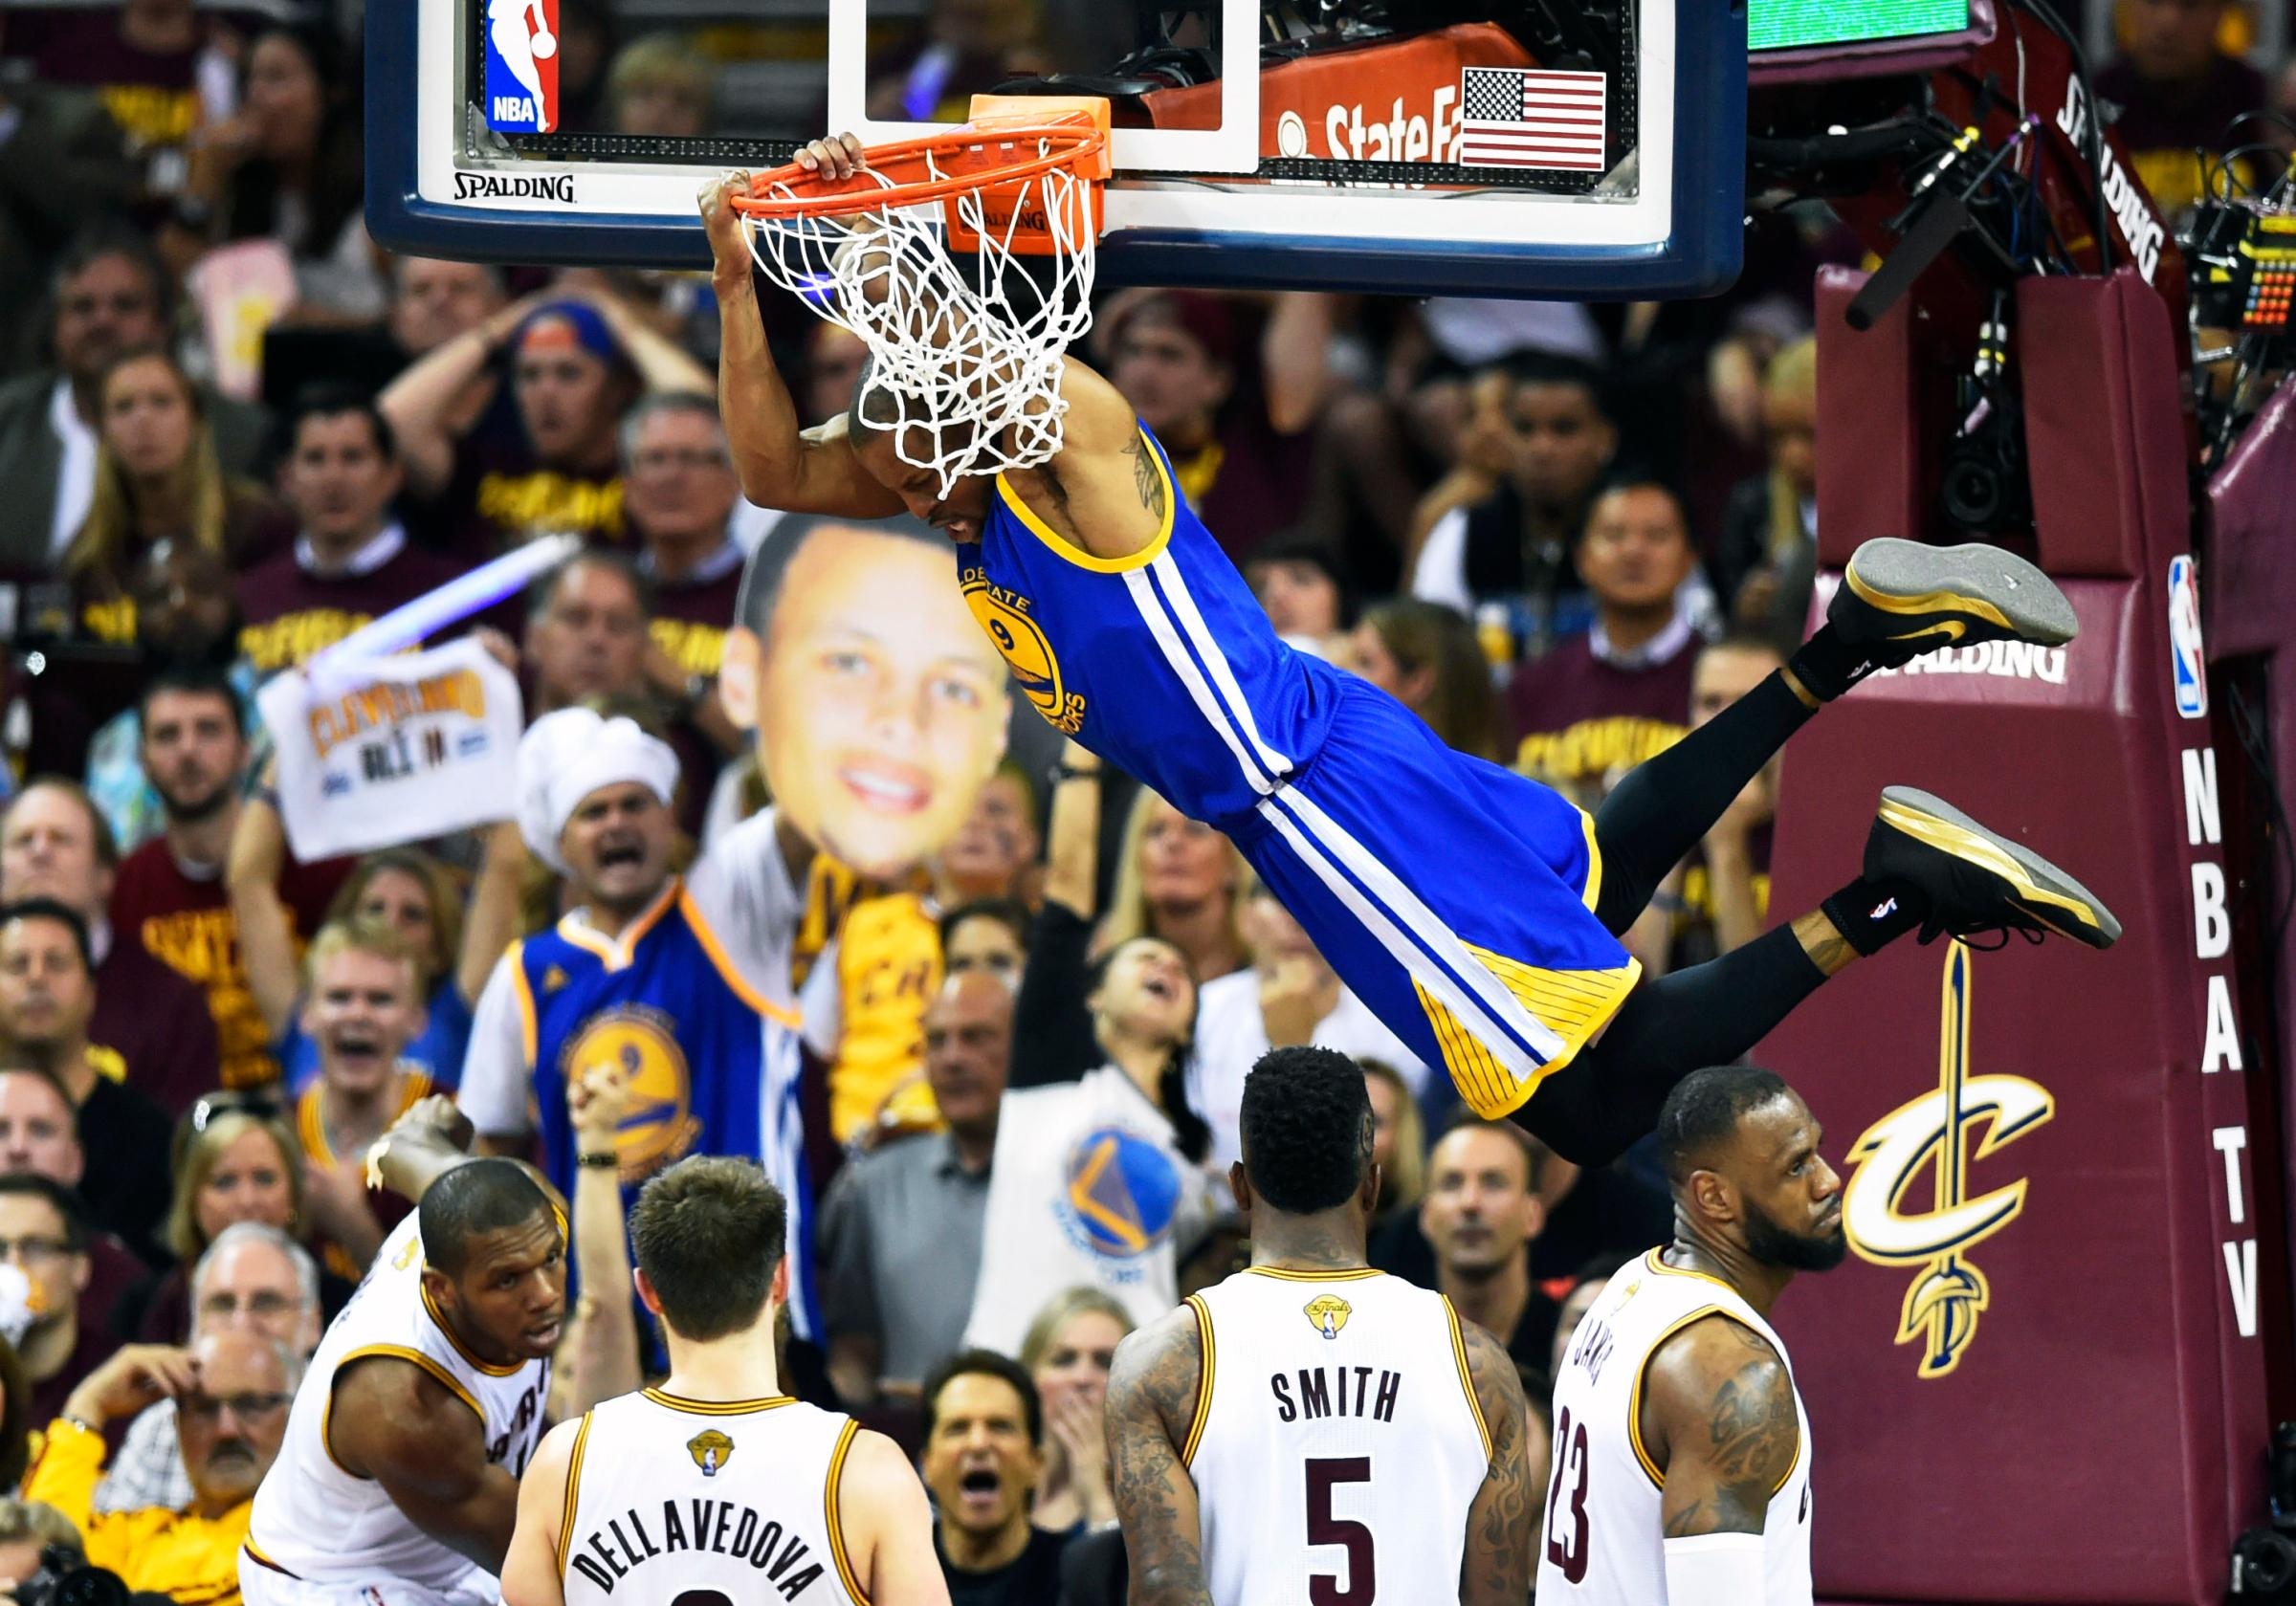 Golden State Warriors guard Andre Iguodala (9) dunks against Cleveland Cavaliers forward James Jones (1), guard Matthew Dellavedova (8), guard J.R. Smith (5), and forward LeBron James (23), bottom right, during game six of the NBA Finals in Cleveland on June 17, 2015.